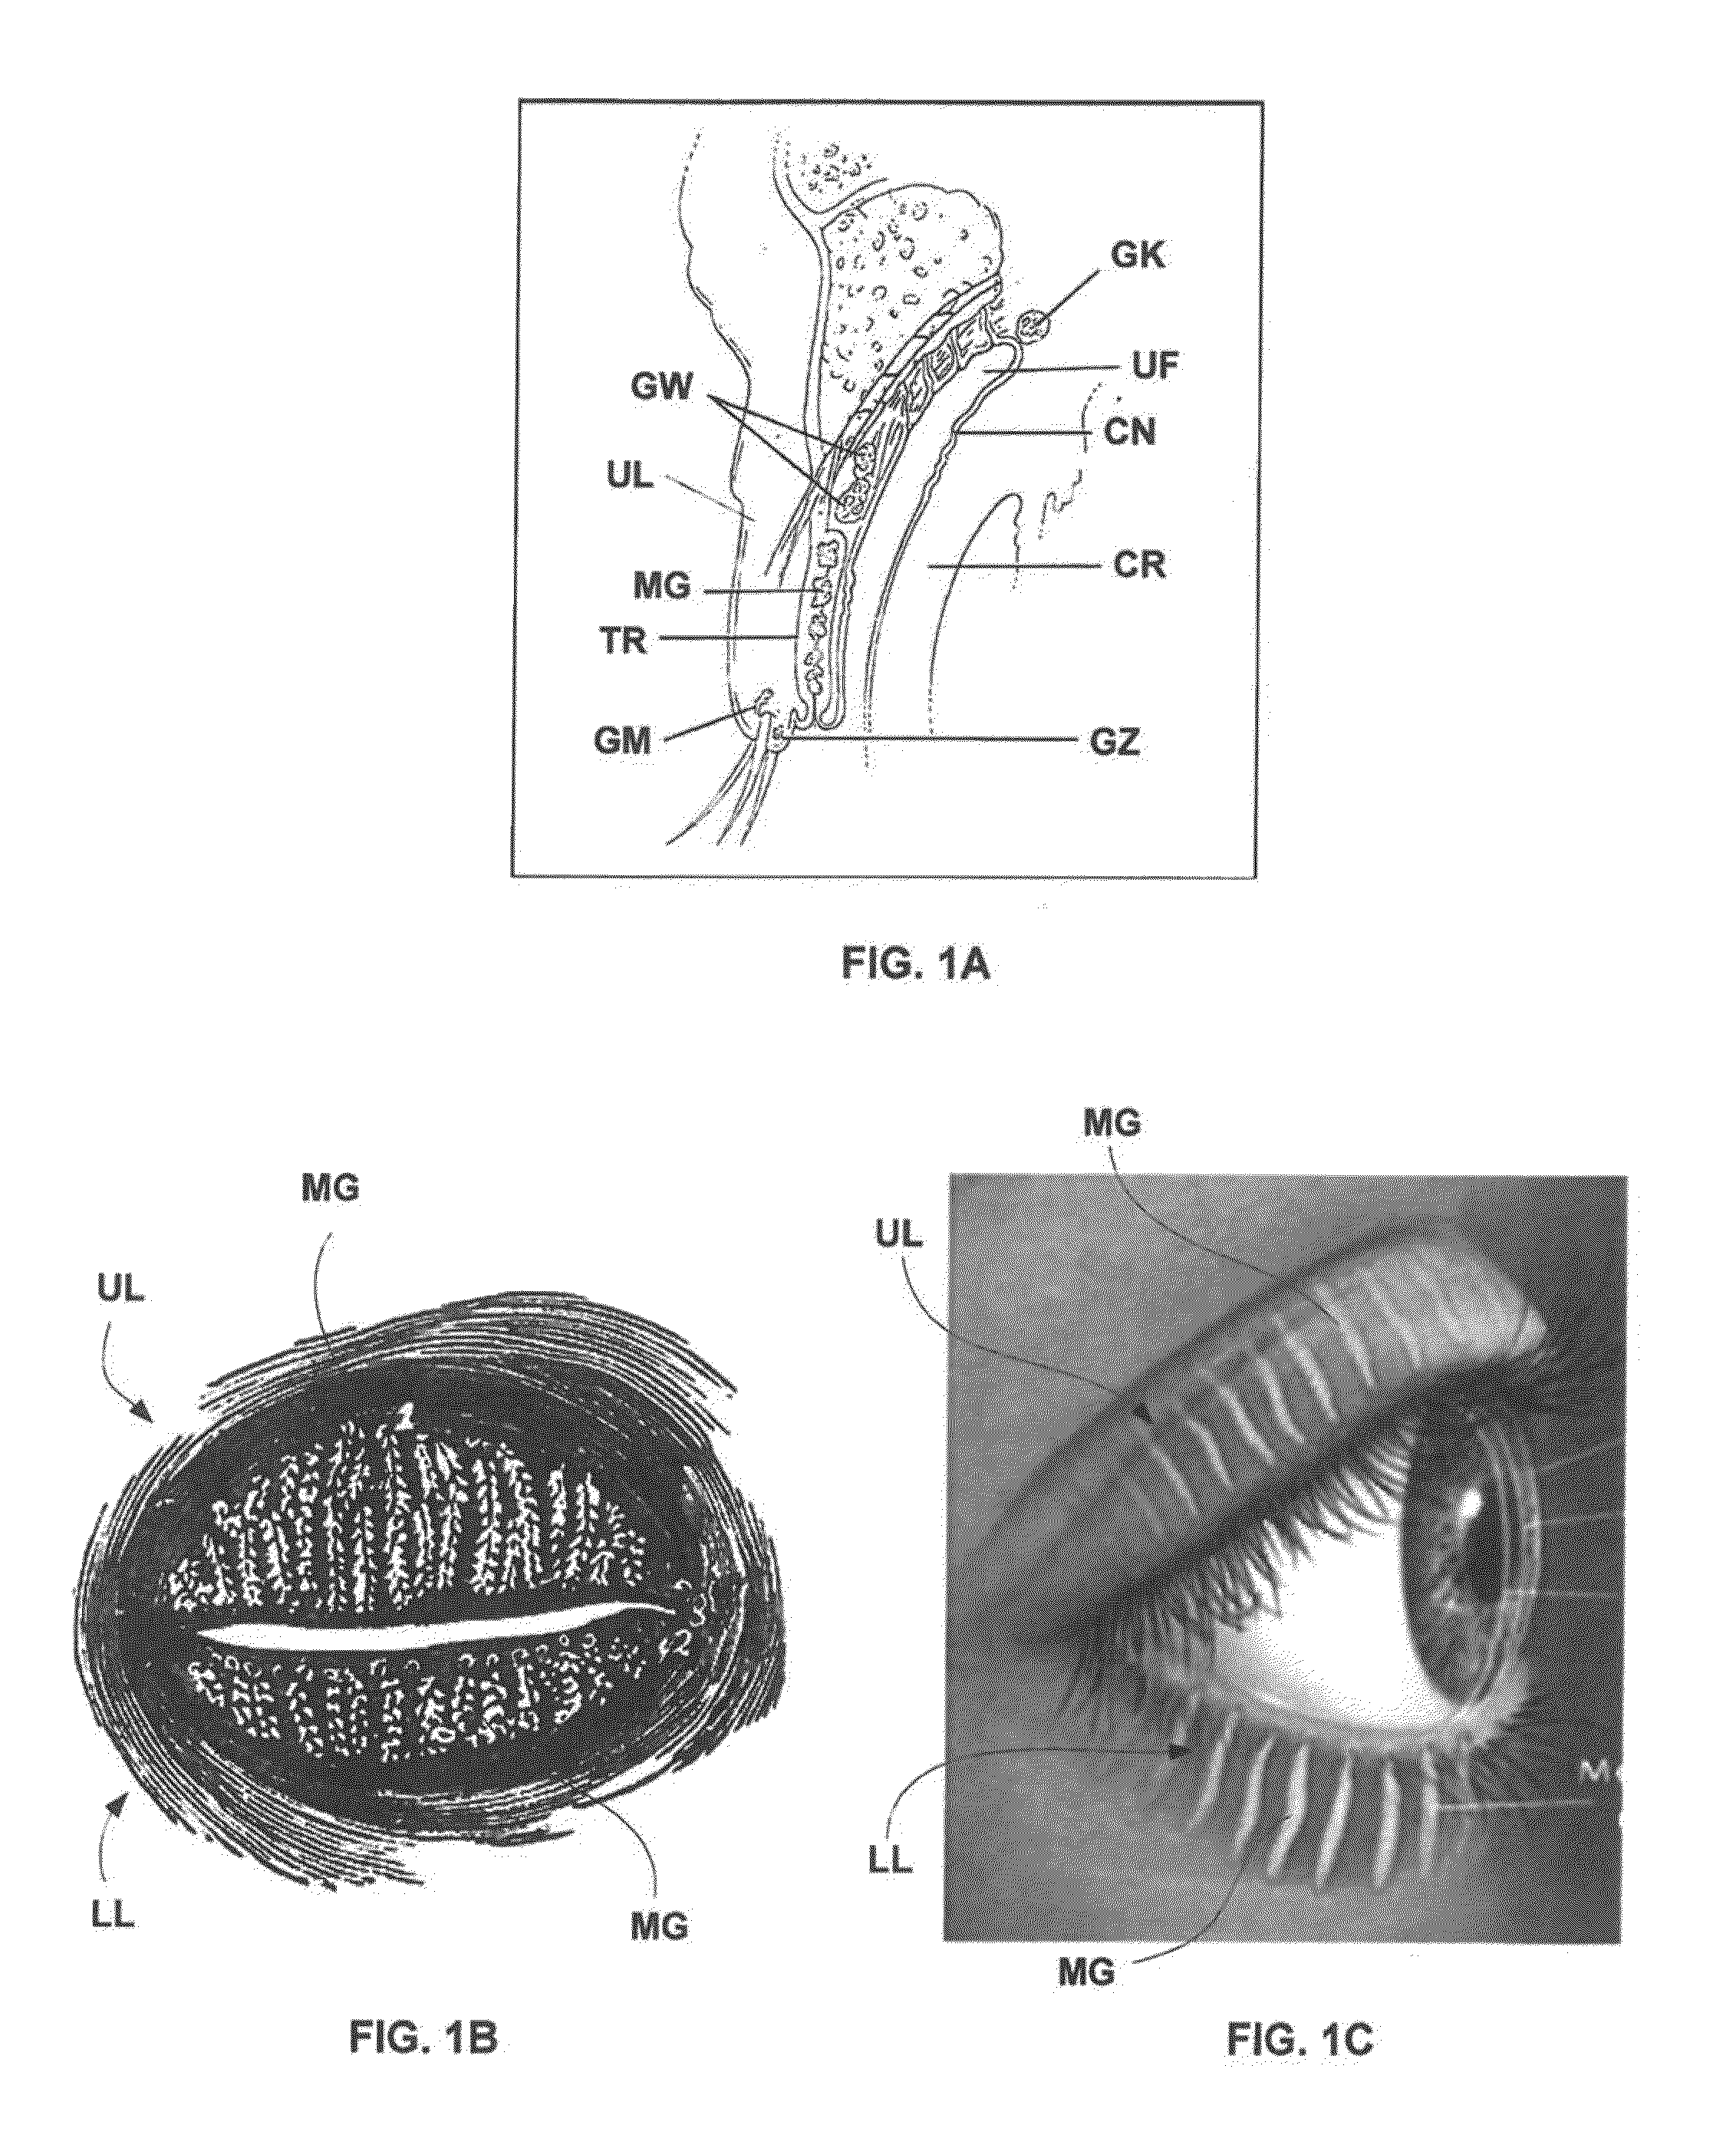 Dry eye treatment apparatus and methods